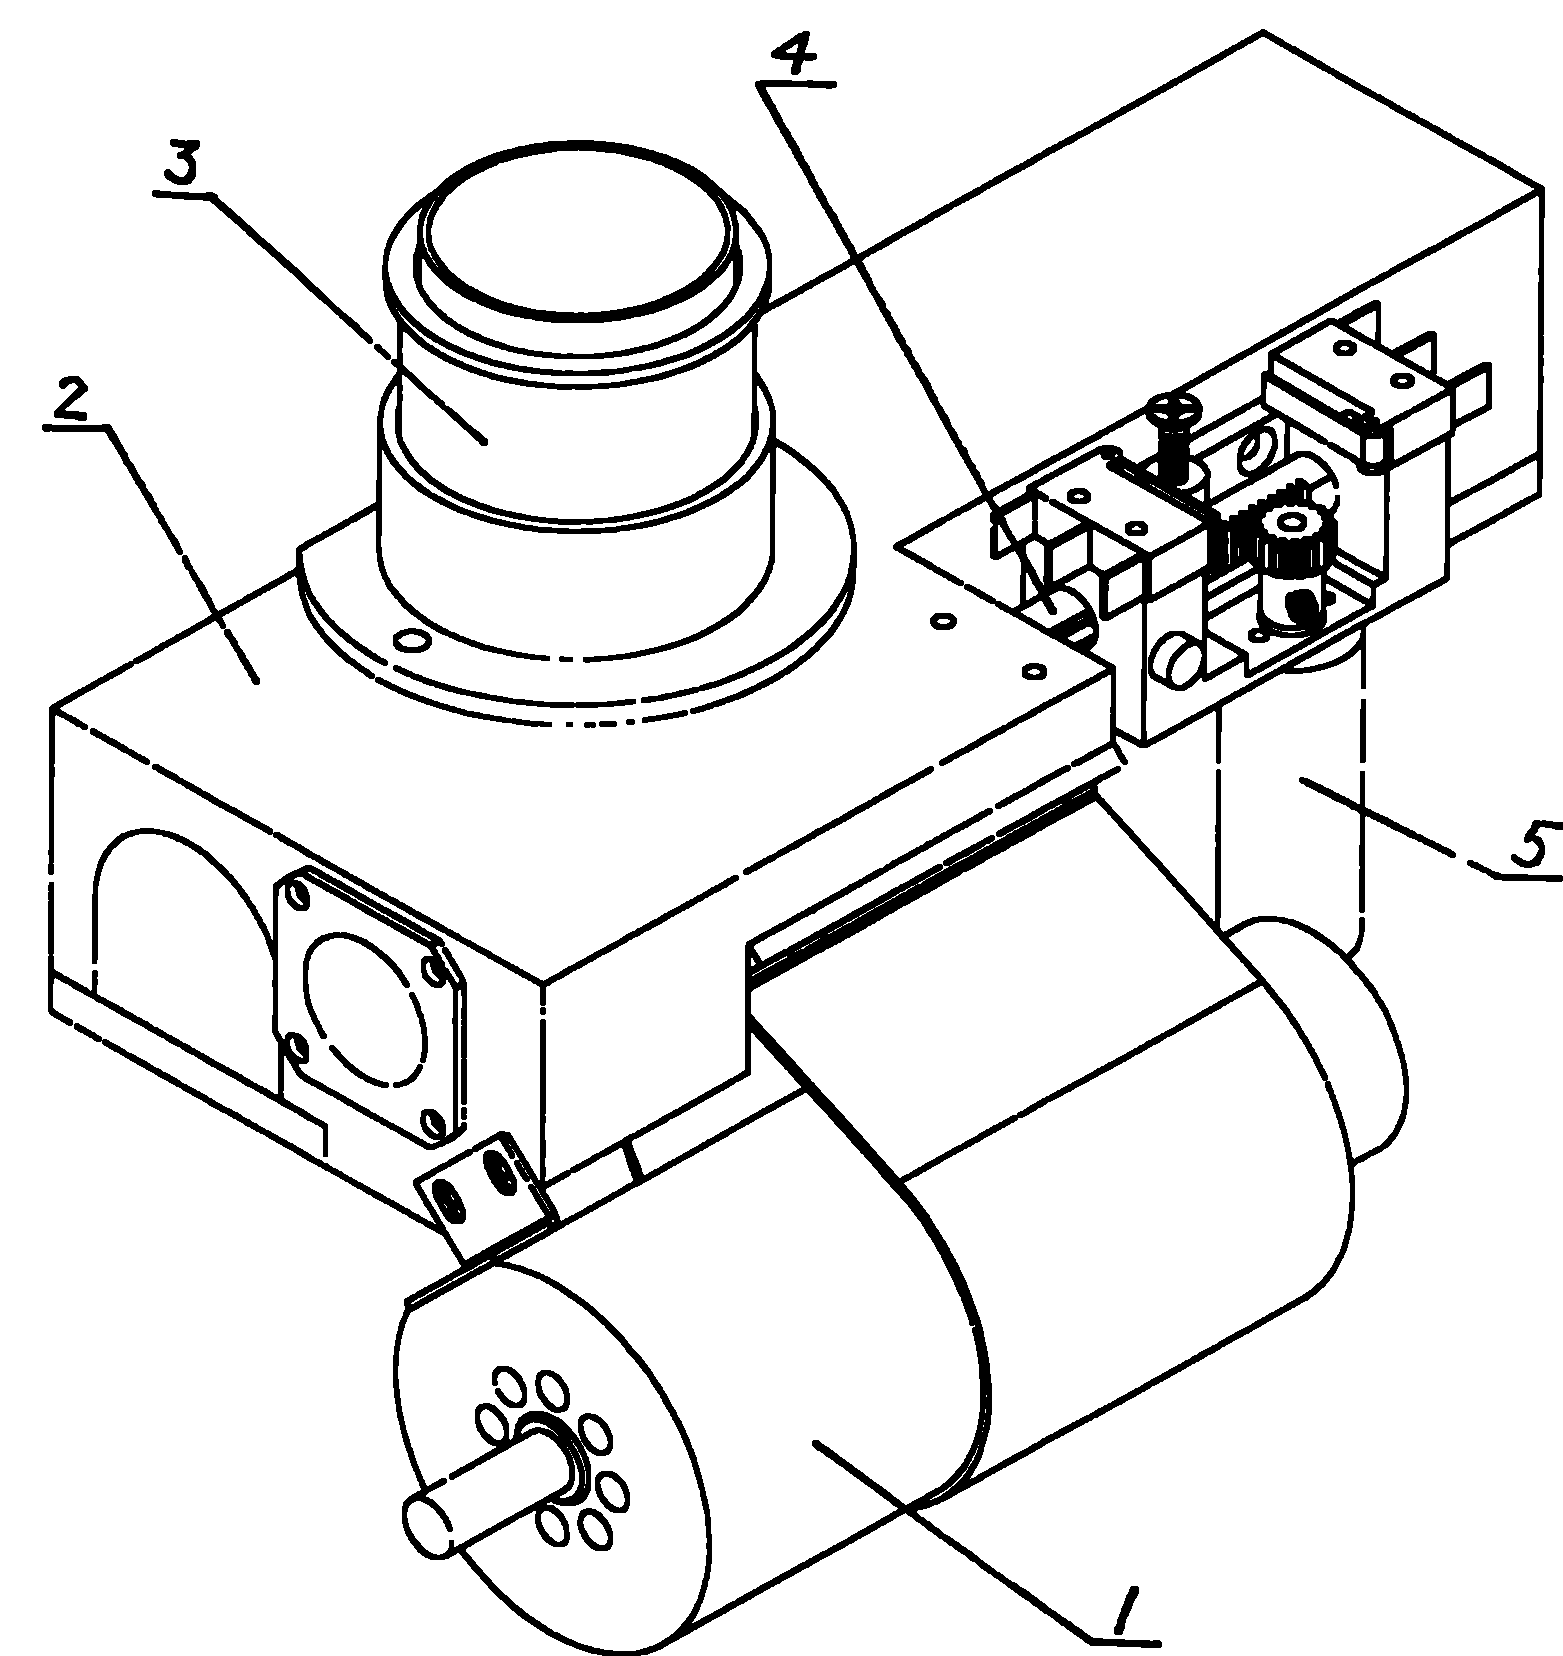 Photoelectric conversion device for detecting sulfur